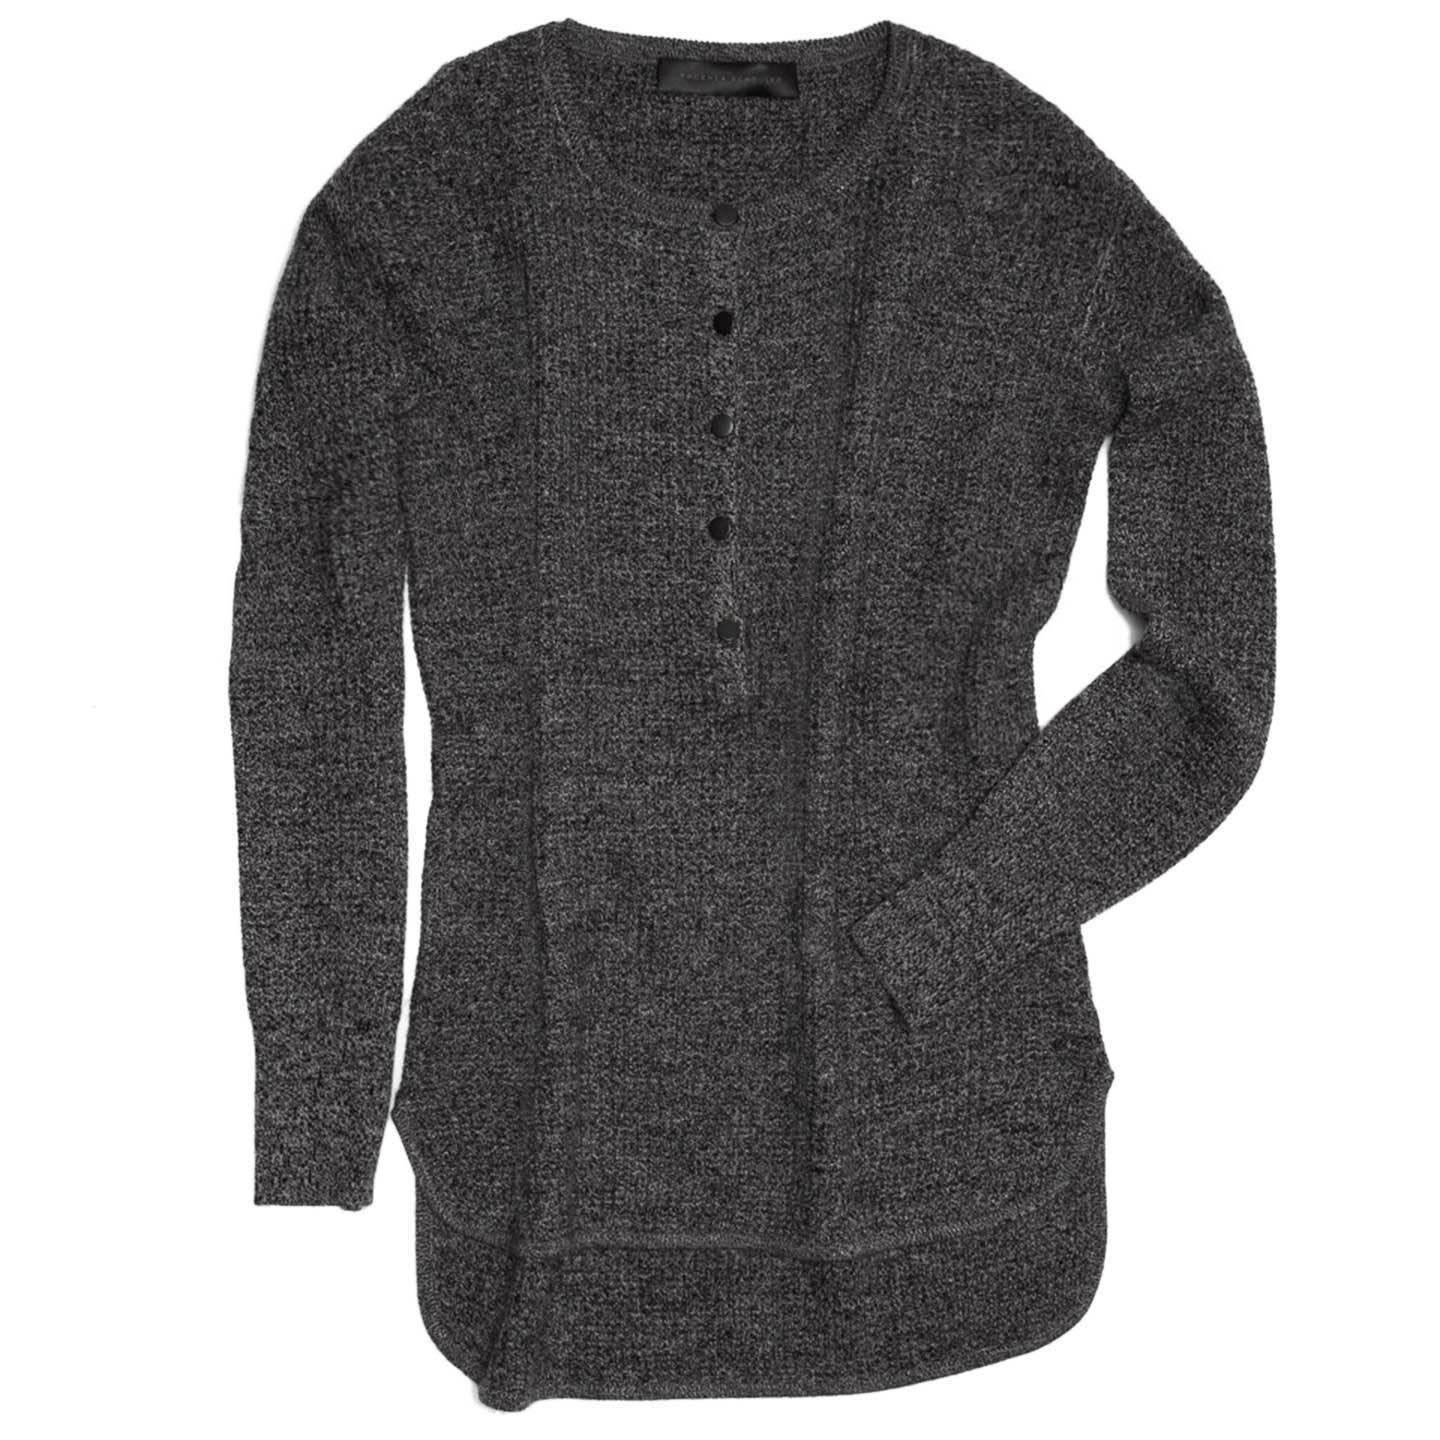 Proenza Schouler black & grey melange henley style Cashmere knit sweater with five button closure. The hem is rounded and has shorter front and longer back.

Size  L Universal sizing

Condition  Excellent: Never Worn